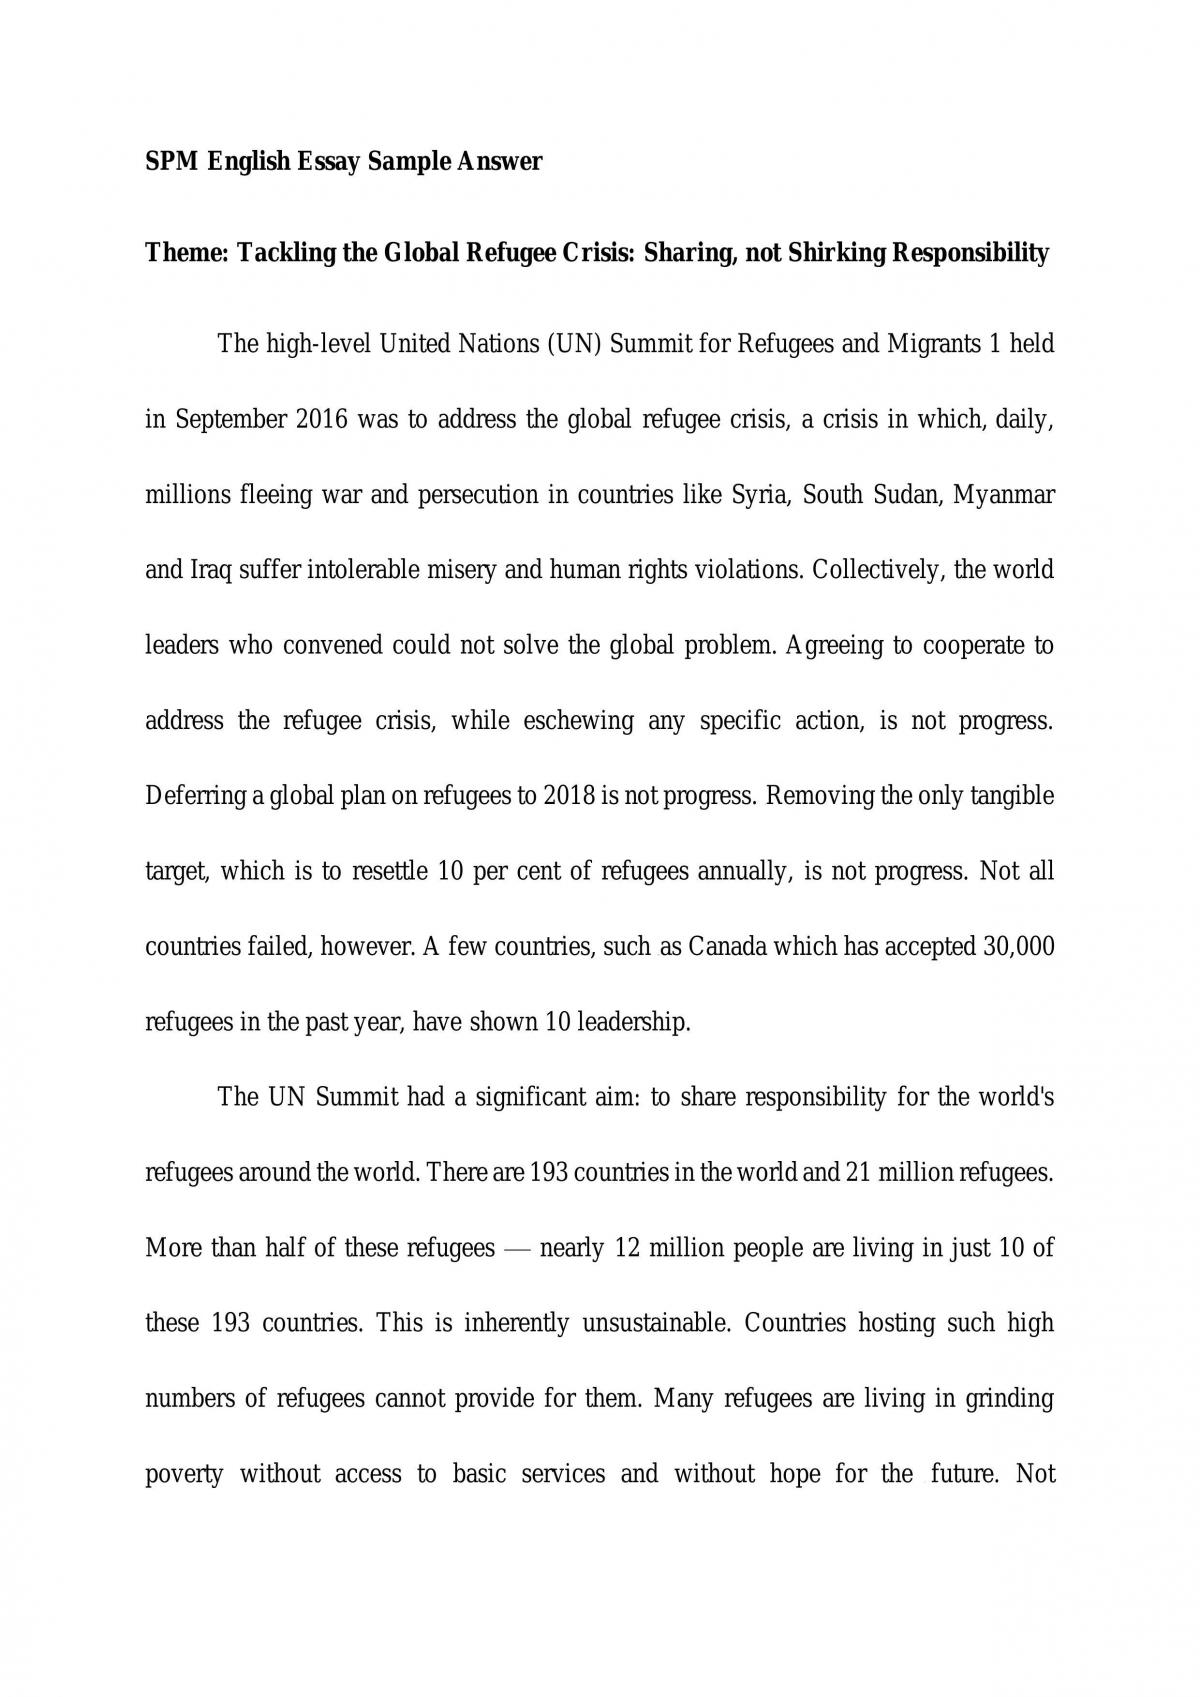 research paper topics on refugees